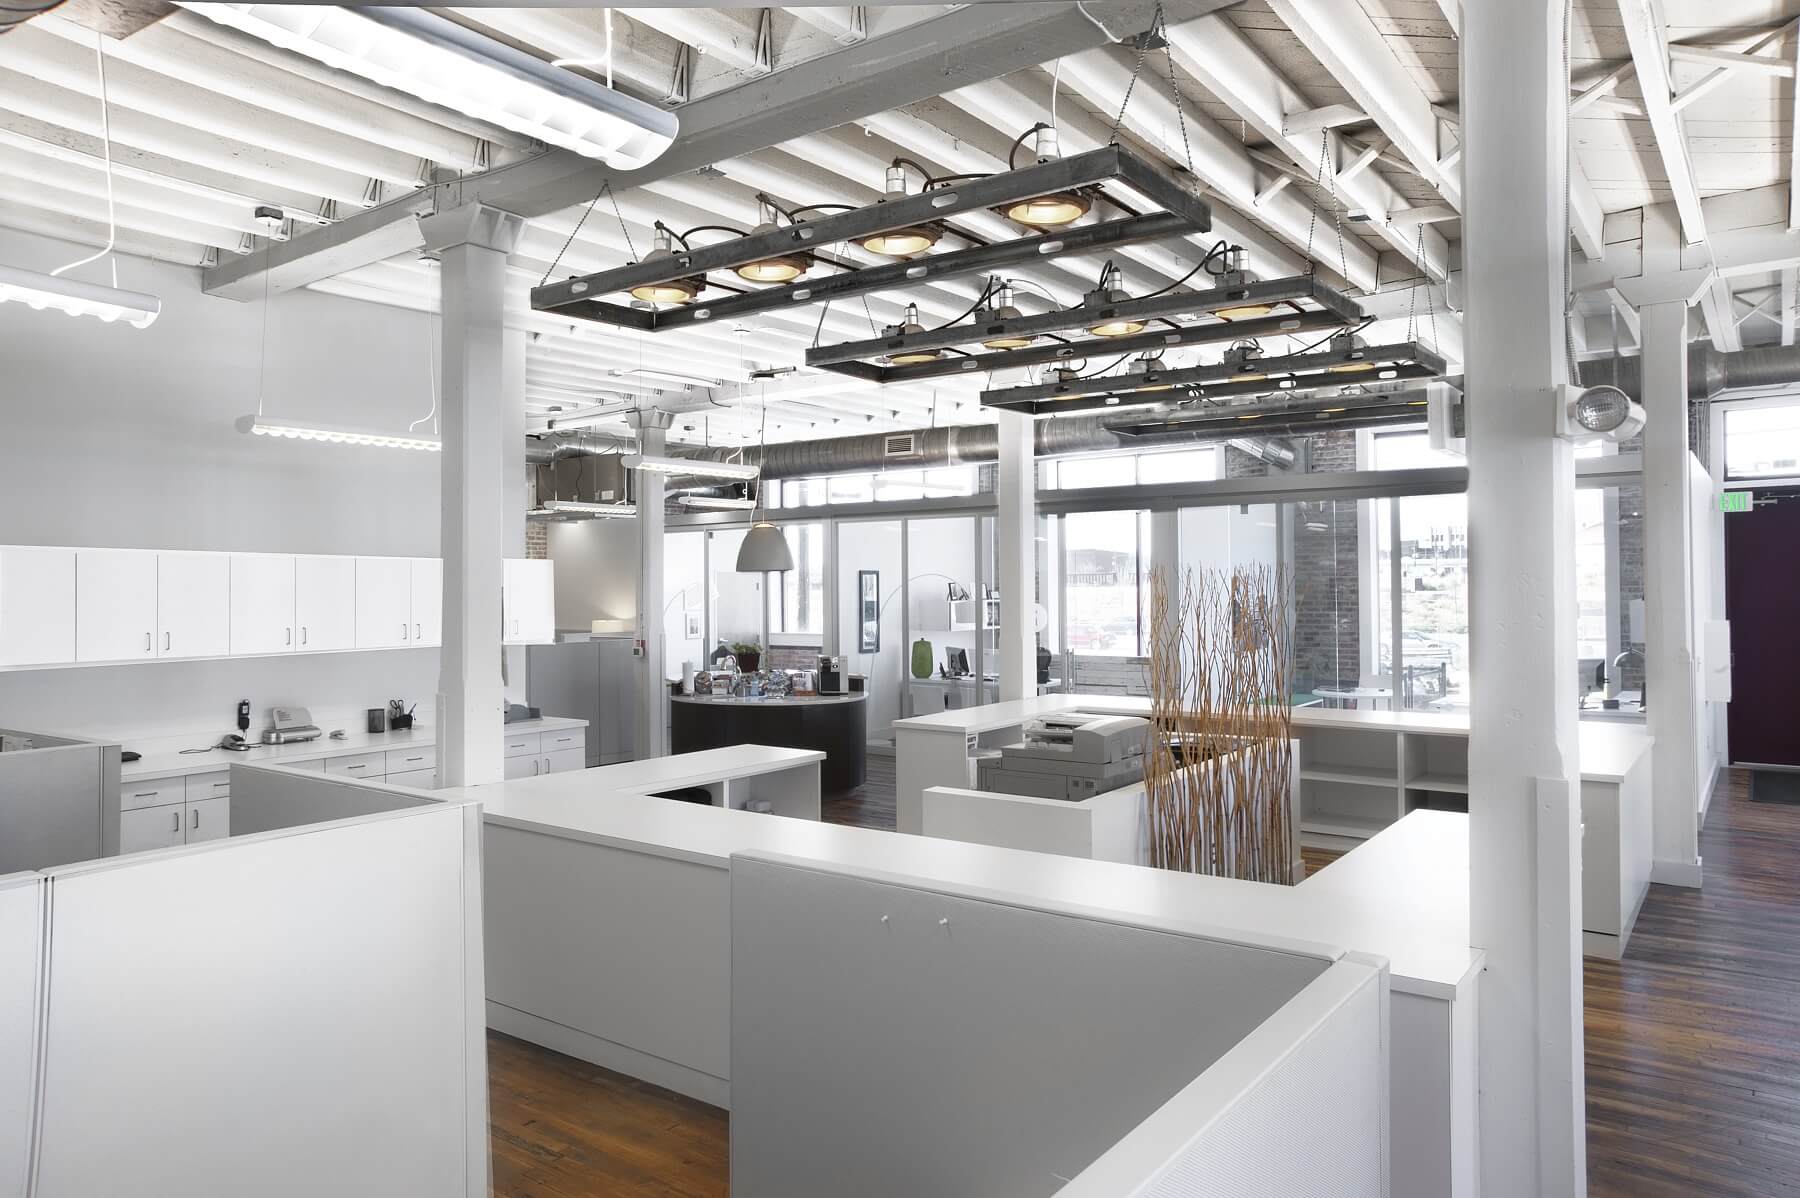 Another section of the building is converts the historical space into an airy light-filled modern office Image Liesa Cole